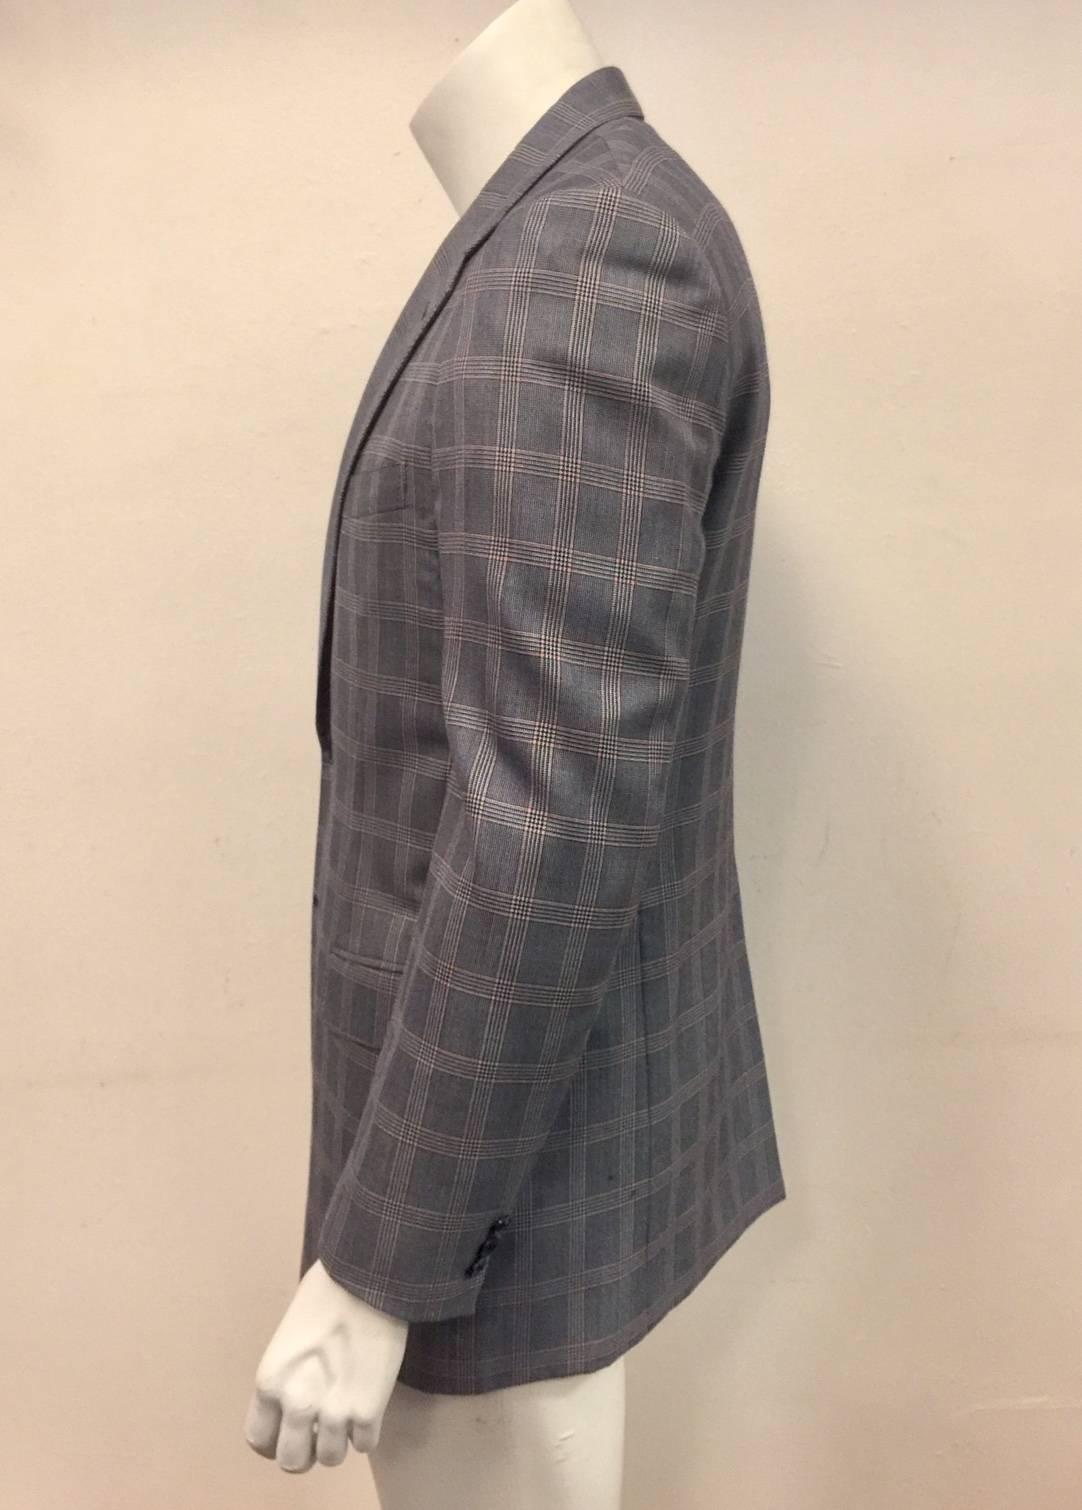 Brioni Palatino jacket in a windowpane check of blue with soft red, fabric is 97 percent wool and 3 percent silk. Made in Italy, for Maus & Hoffman, a premier Palm Beach family owned store that caters to discerning clients, with unique in small